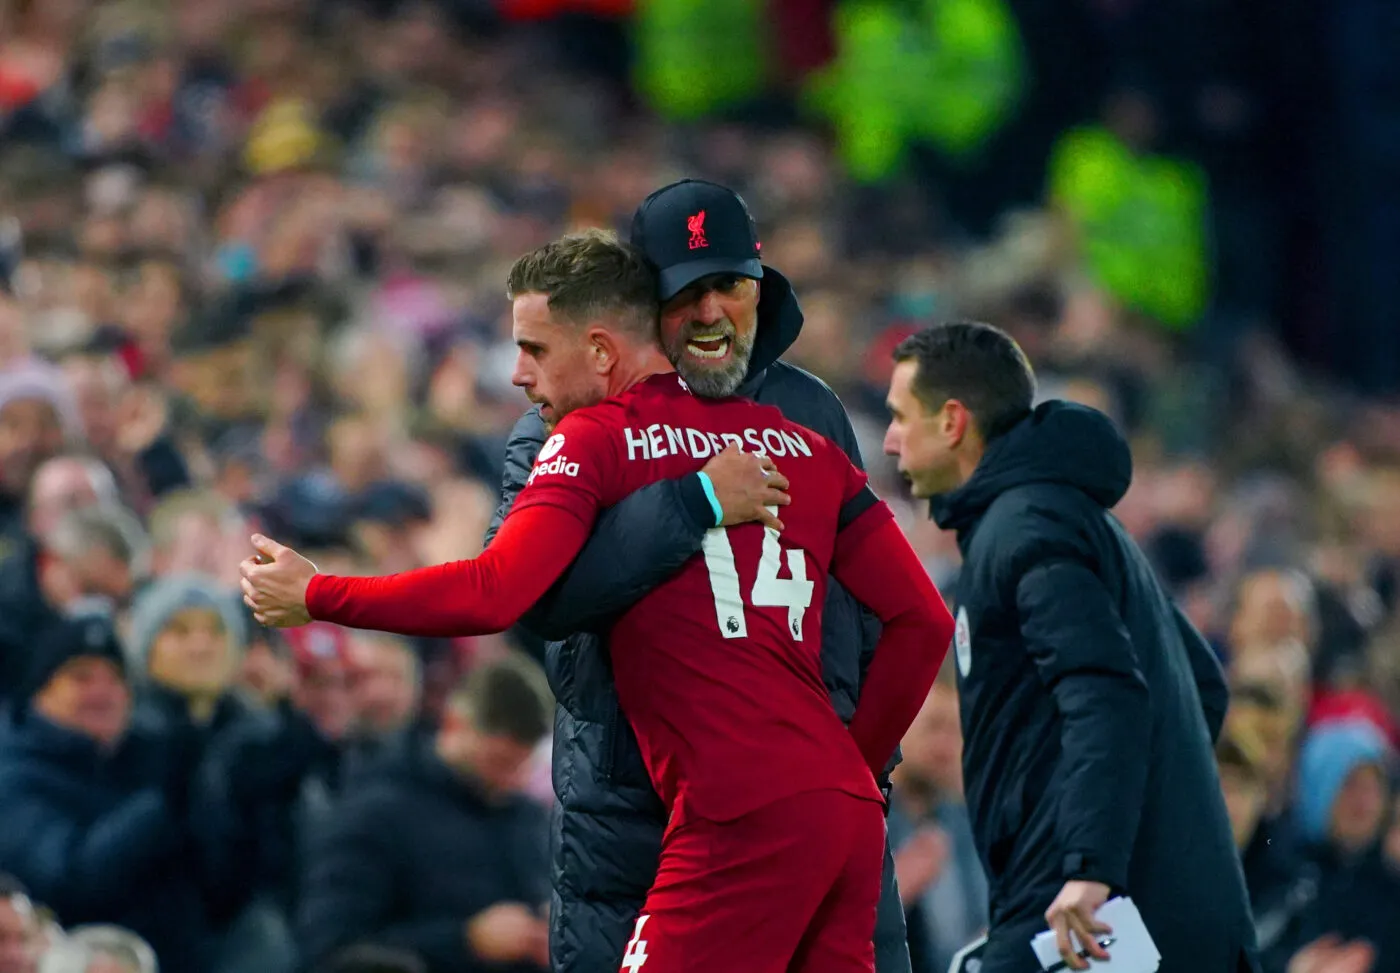 Liverpool's Jordan Henderson hugs manager Jurgen Klopp after being substituted during the Premier League match at Anfield, Liverpool. Picture date: Monday February 13, 2023. - Photo by Icon sport